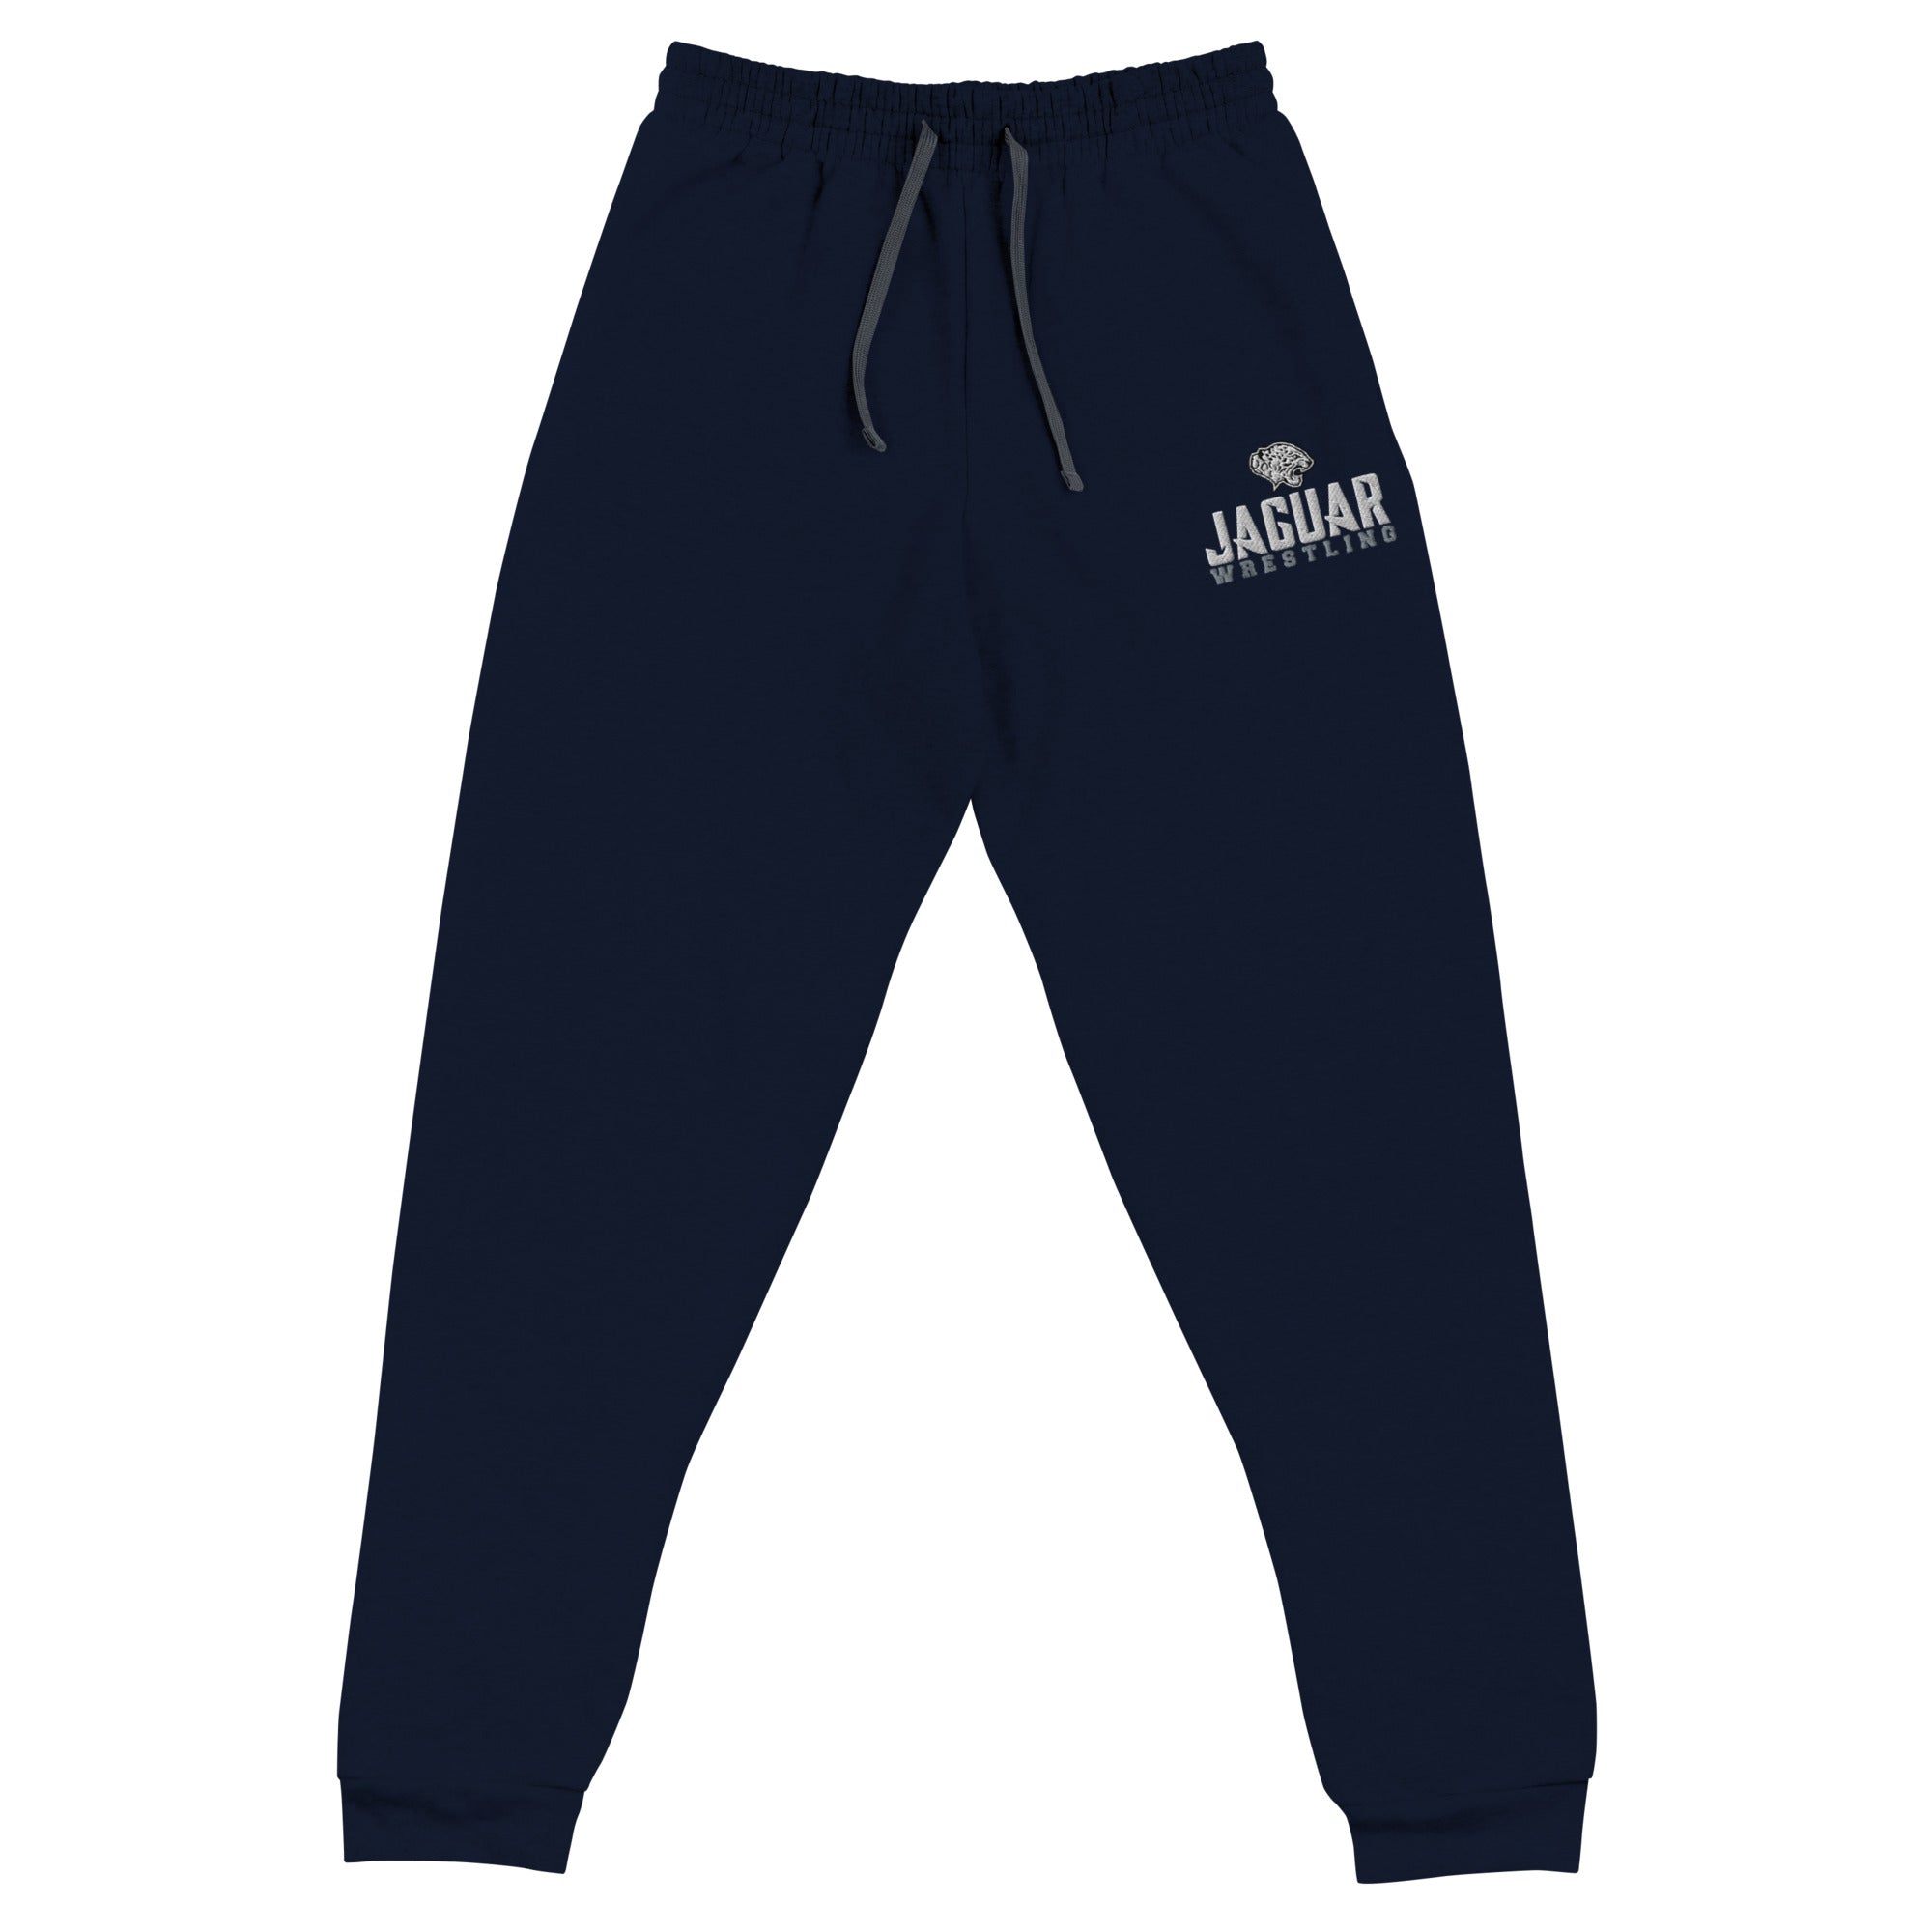 Mill Valley Wrestling Unisex Joggers